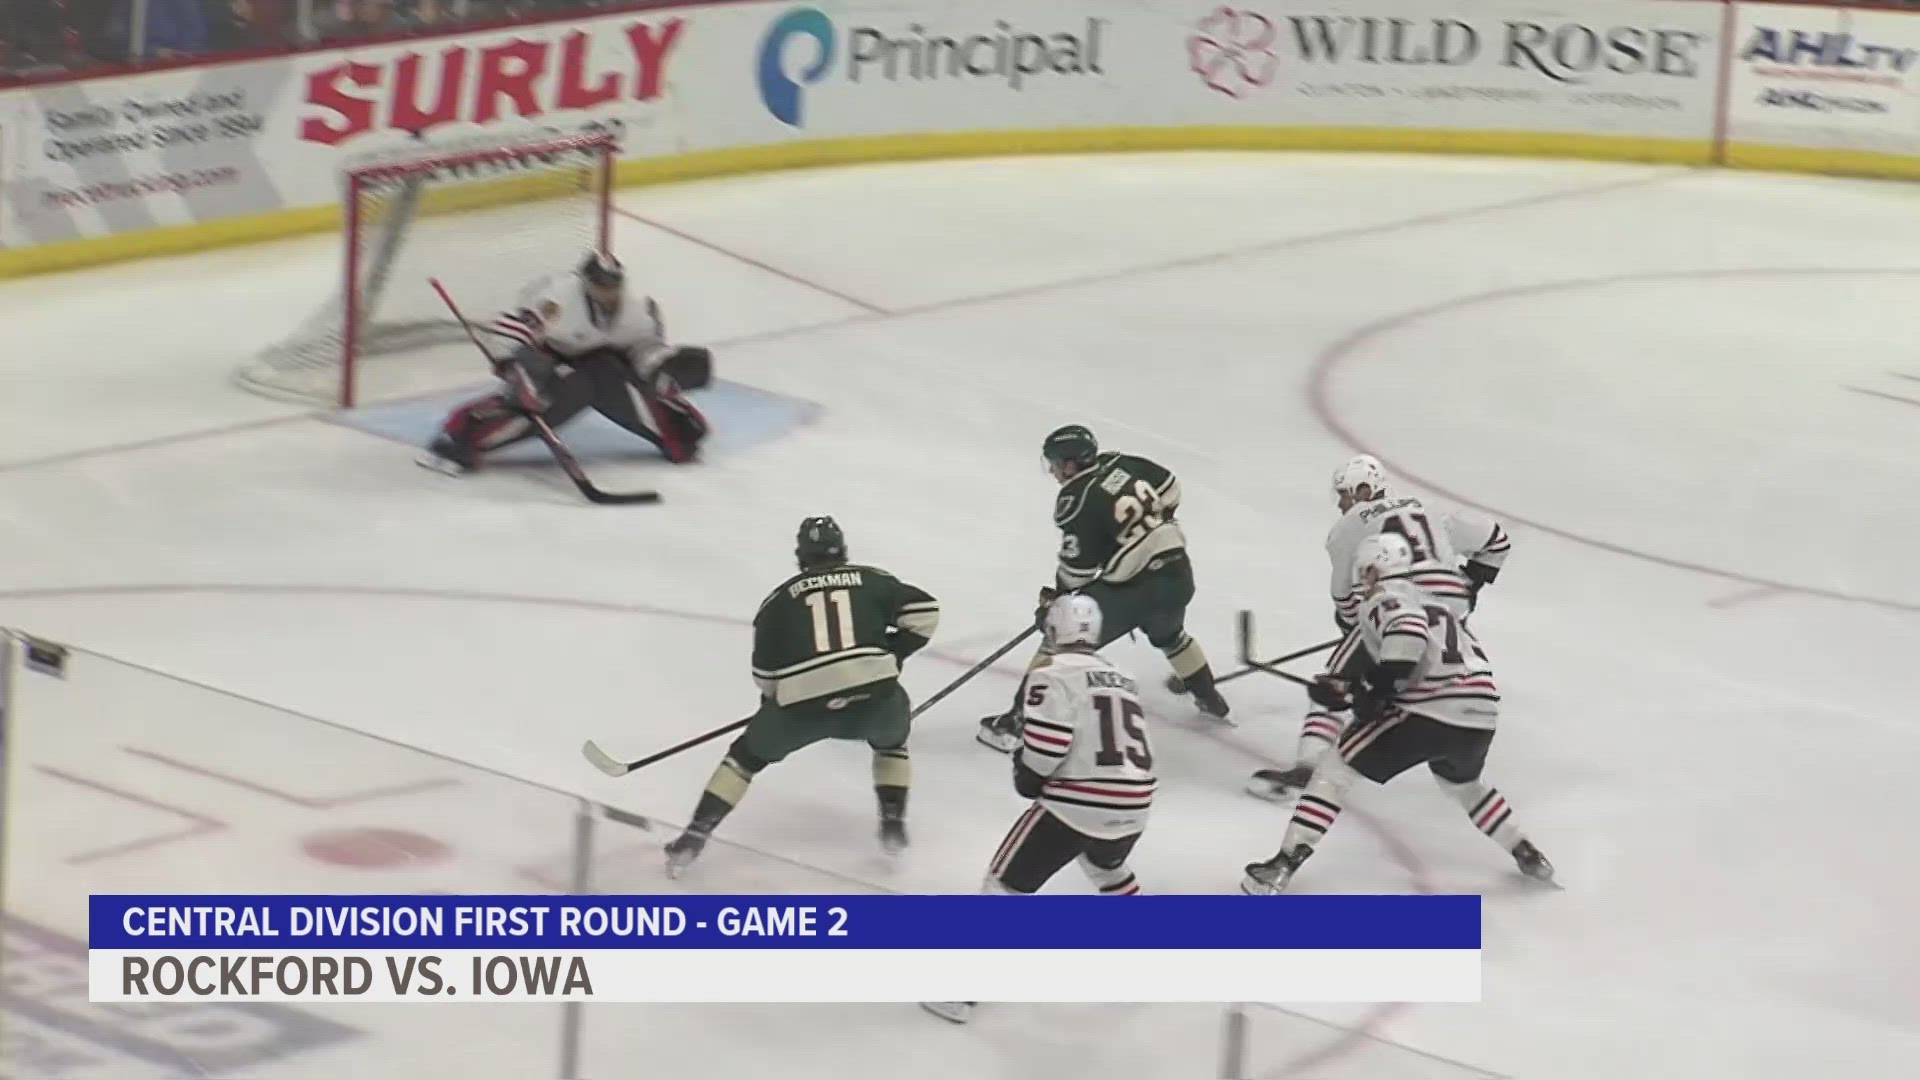 The Iowa Wild were looking to even the series as they took on the Rockford IceHogs in game two of the central division.